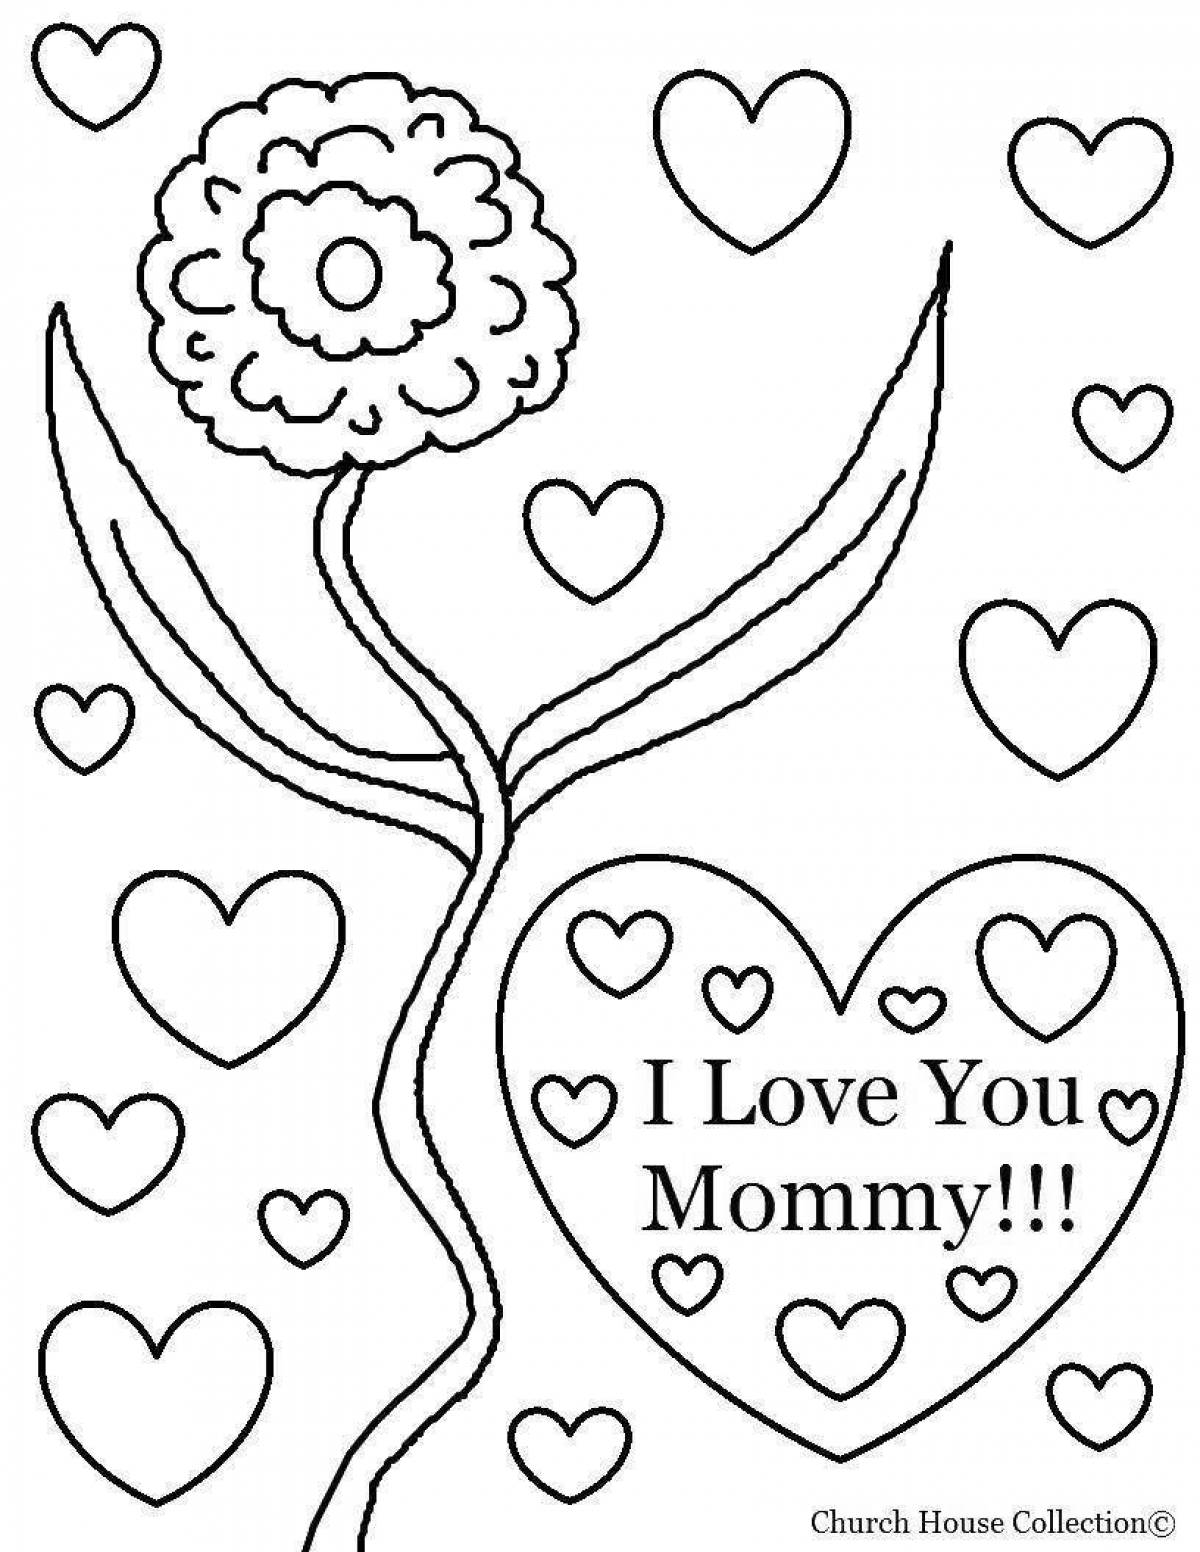 Great birthday coloring book for mom from daughter